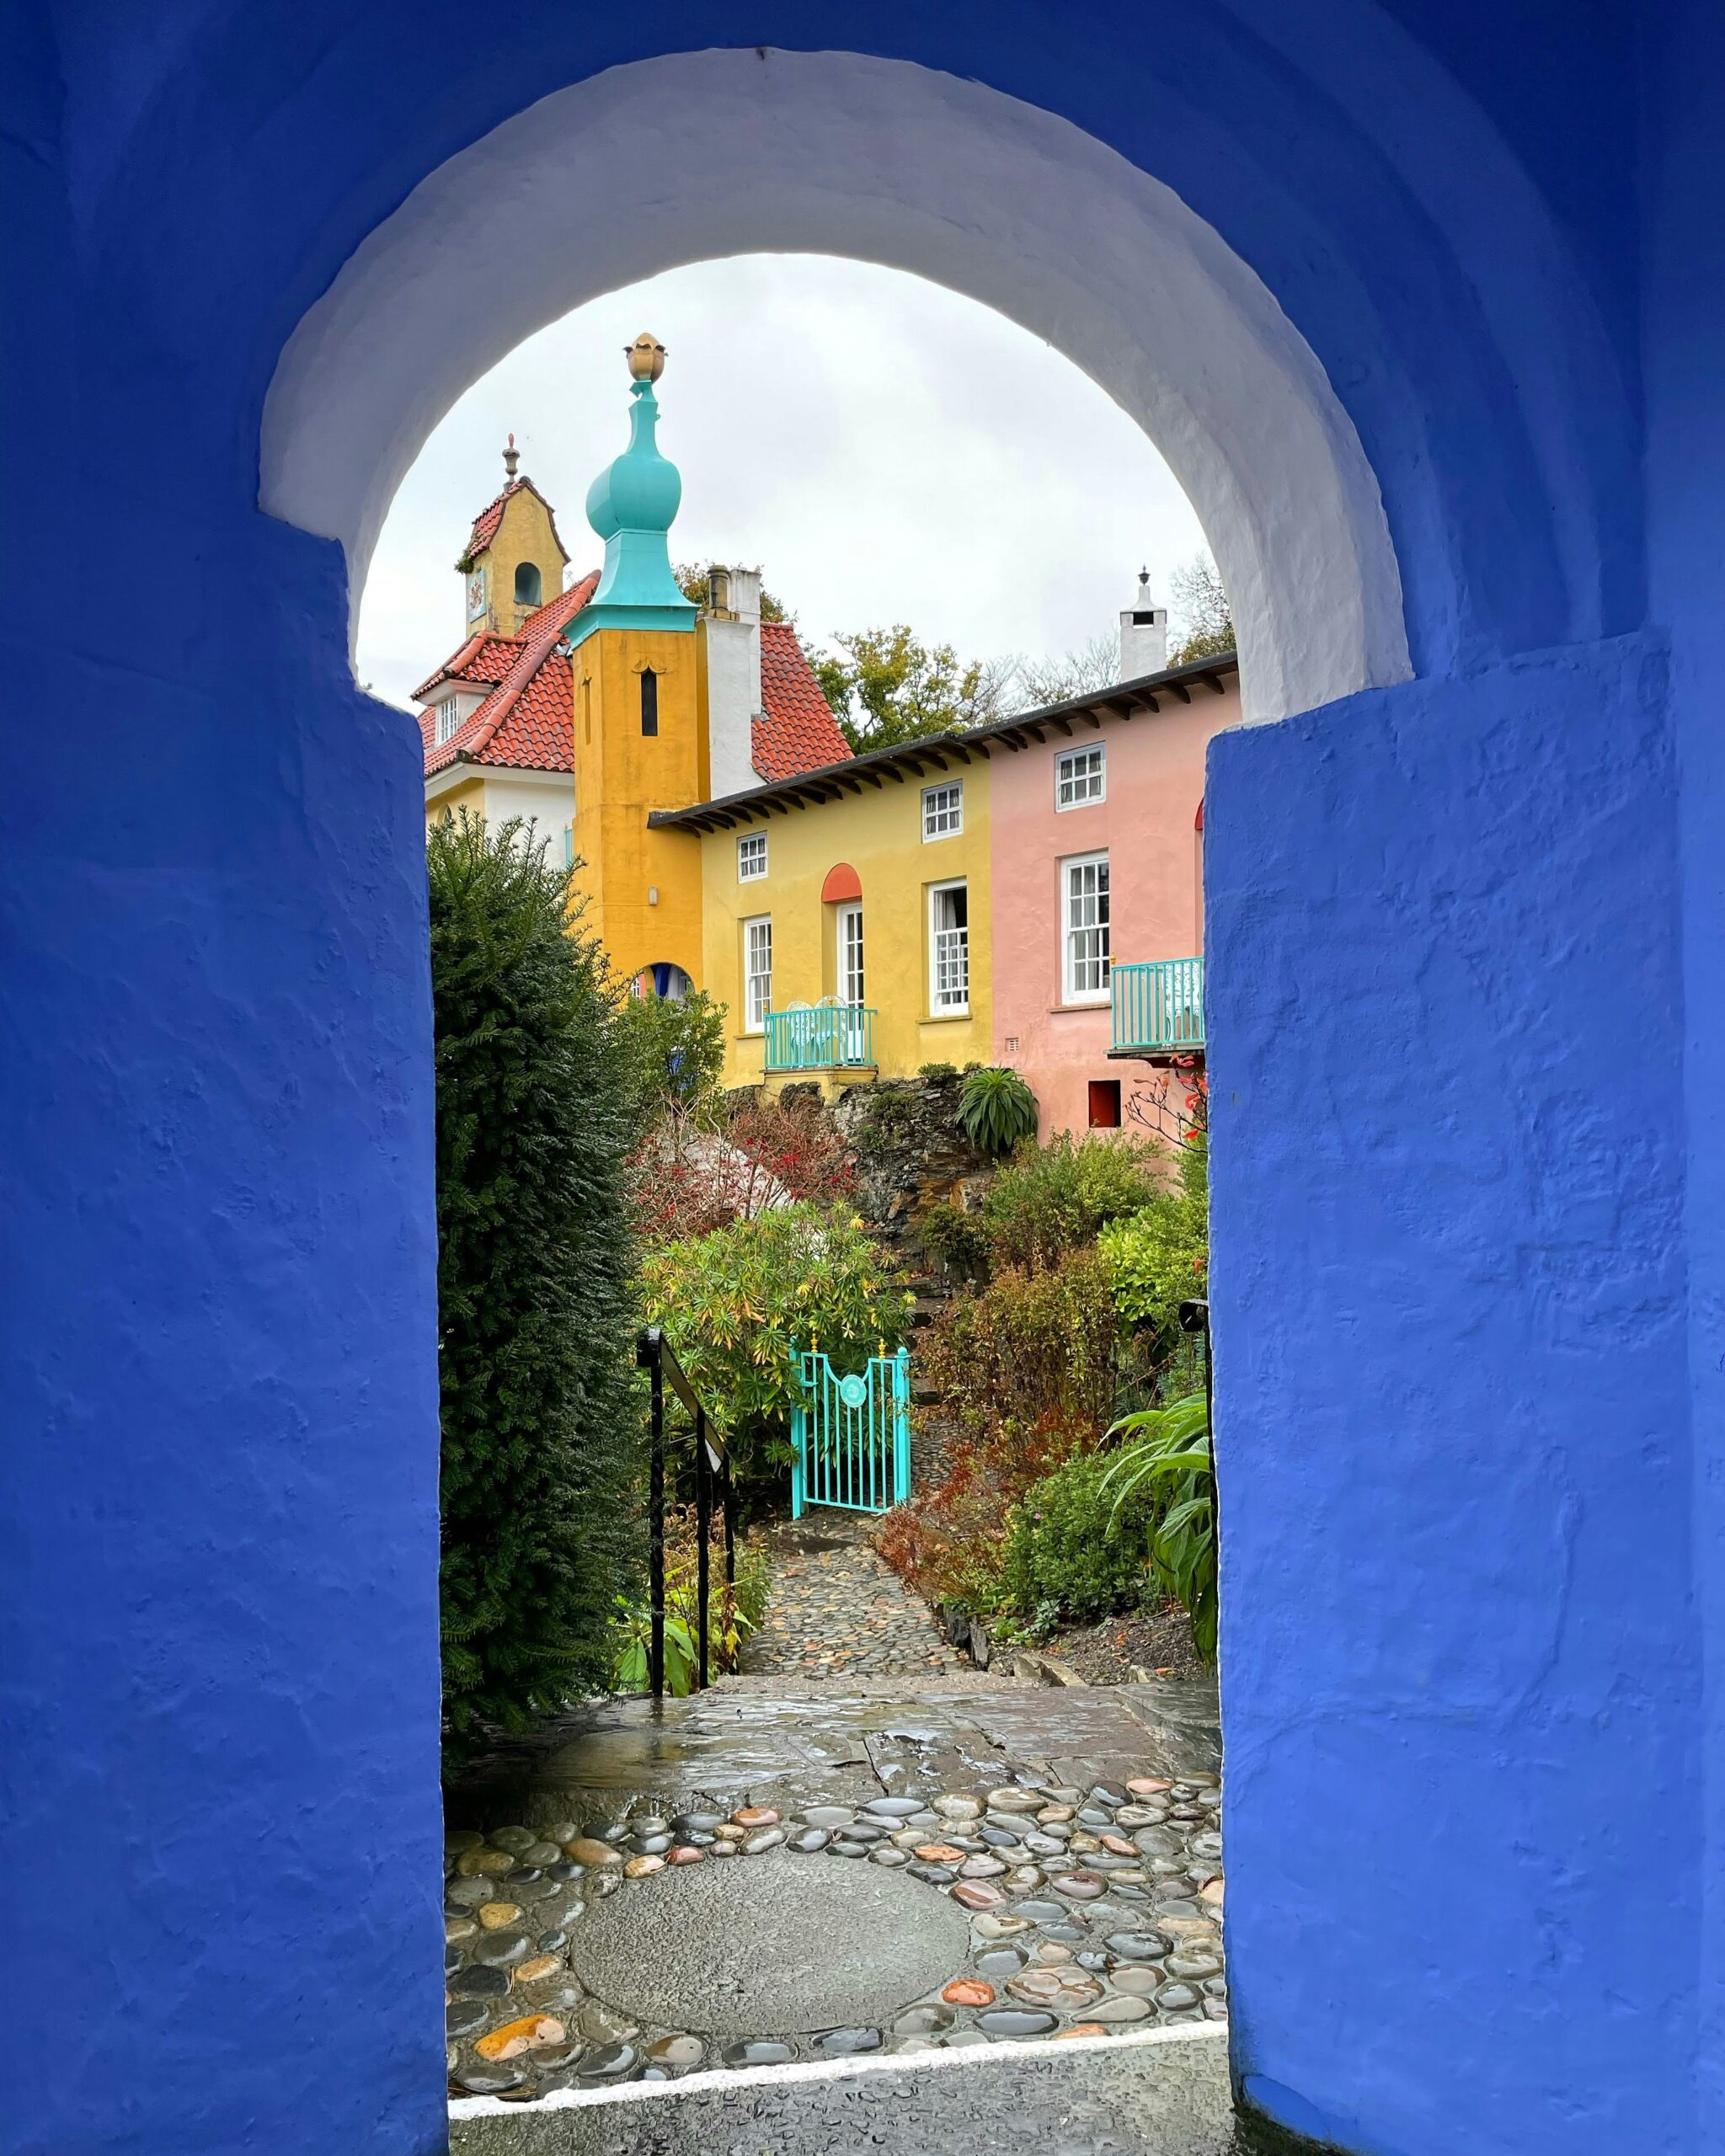 Portmeirion village in North Wales has been named one of the most beautiful places in the UK. Credit: Unsplash Karen Cann